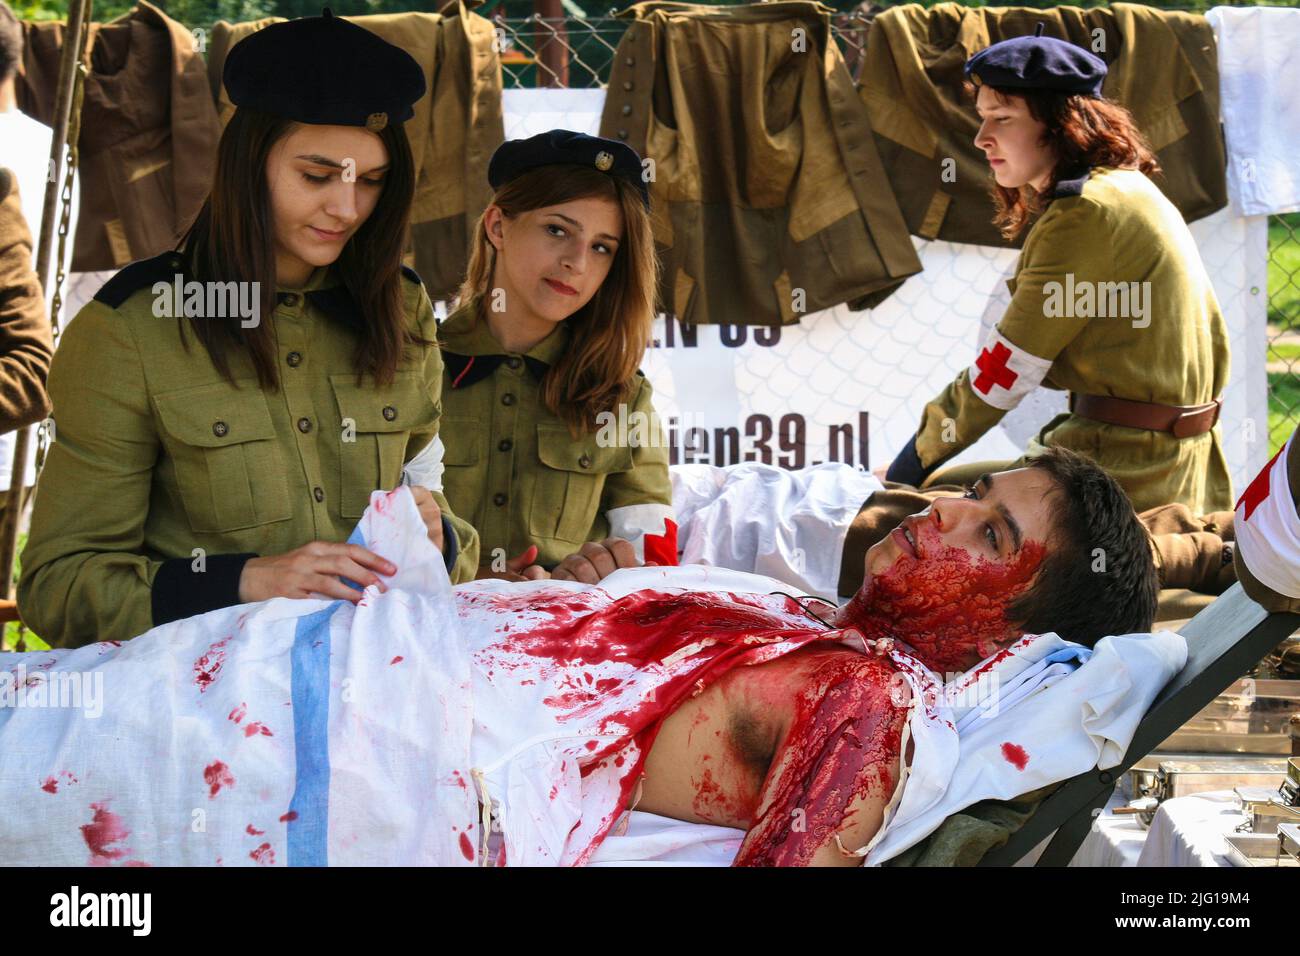 Warsaw, Poland - 15 august 2008: Dressing wound of injured soldier in staging of World War I field hospital Stock Photo